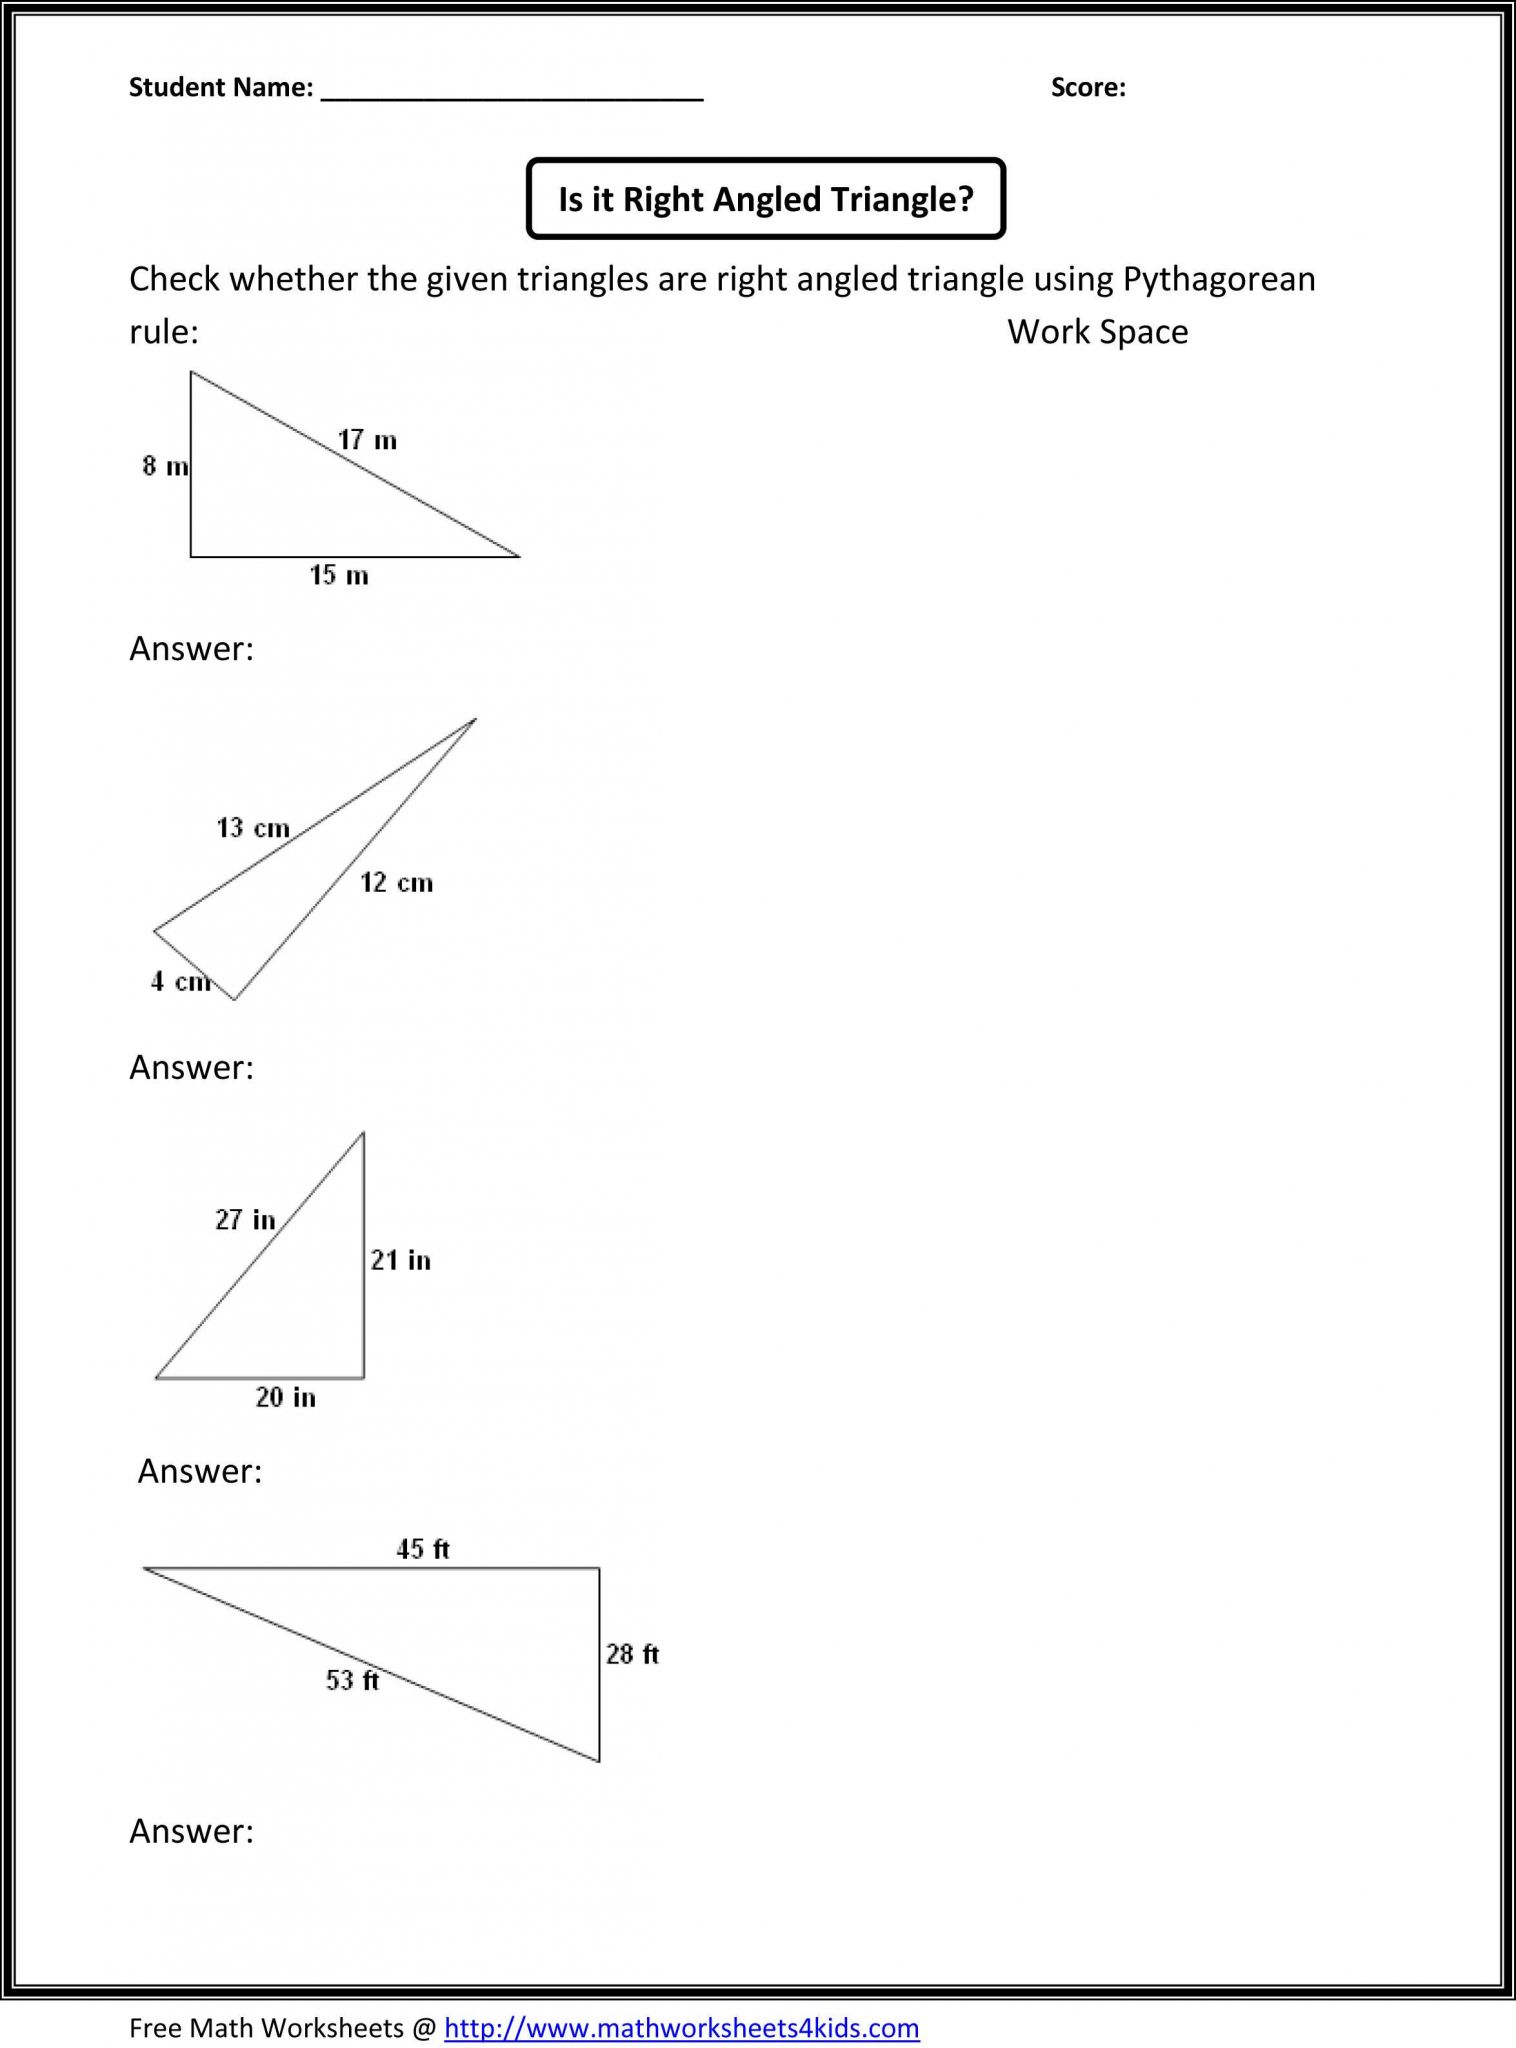 Square Root Worksheets 8th Grade Pdf and Math Worksheets for 8th Grade Pdf the Best Worksheets Image